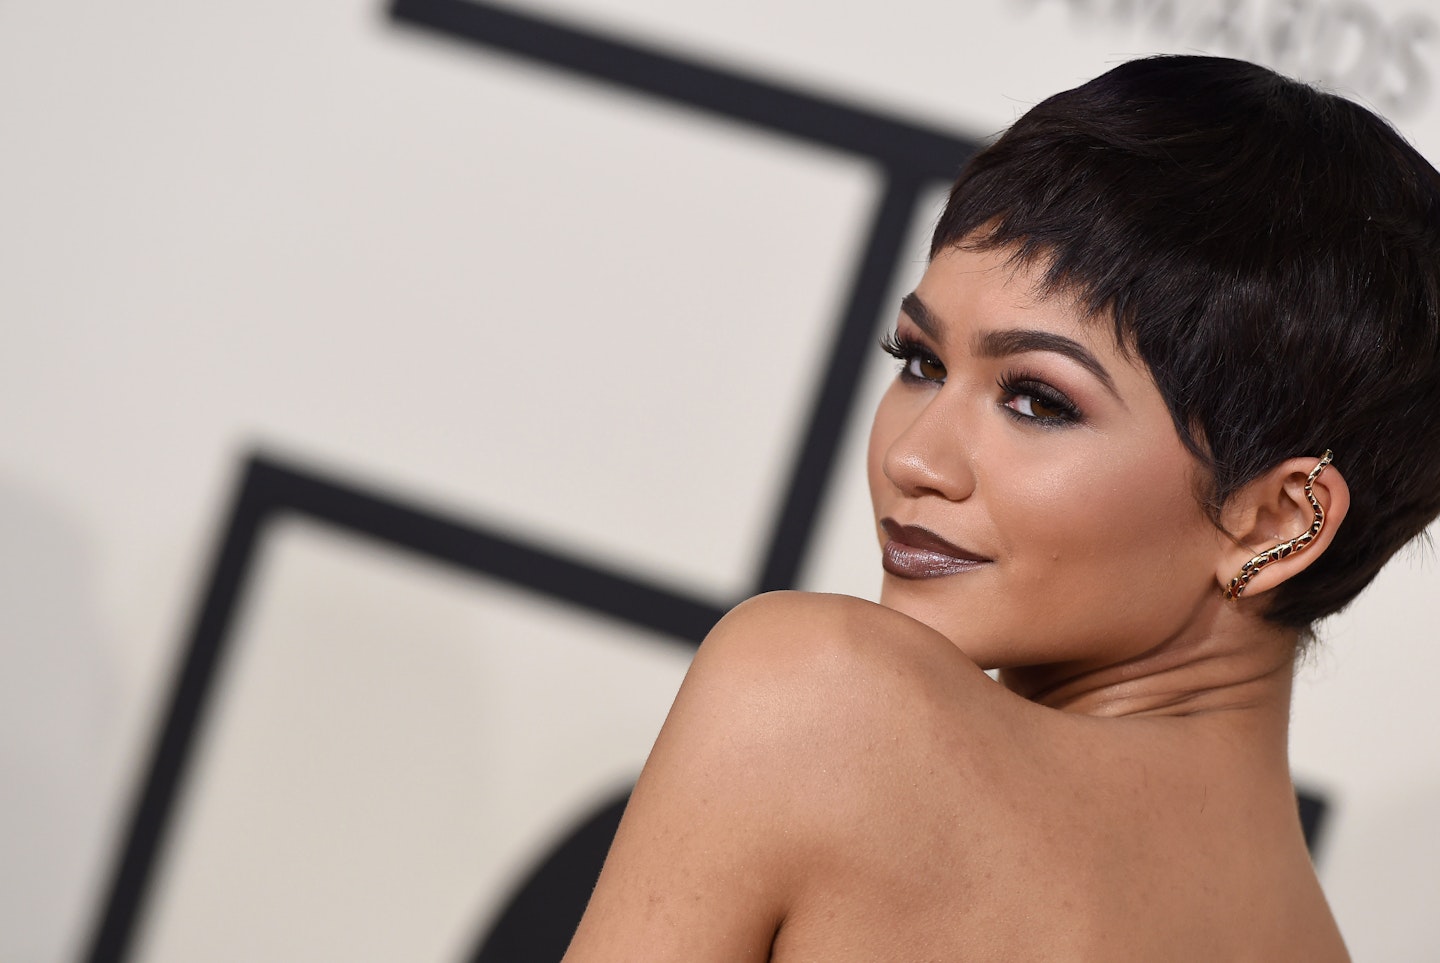 How to Style a Pixie Cut, According to Celebrities